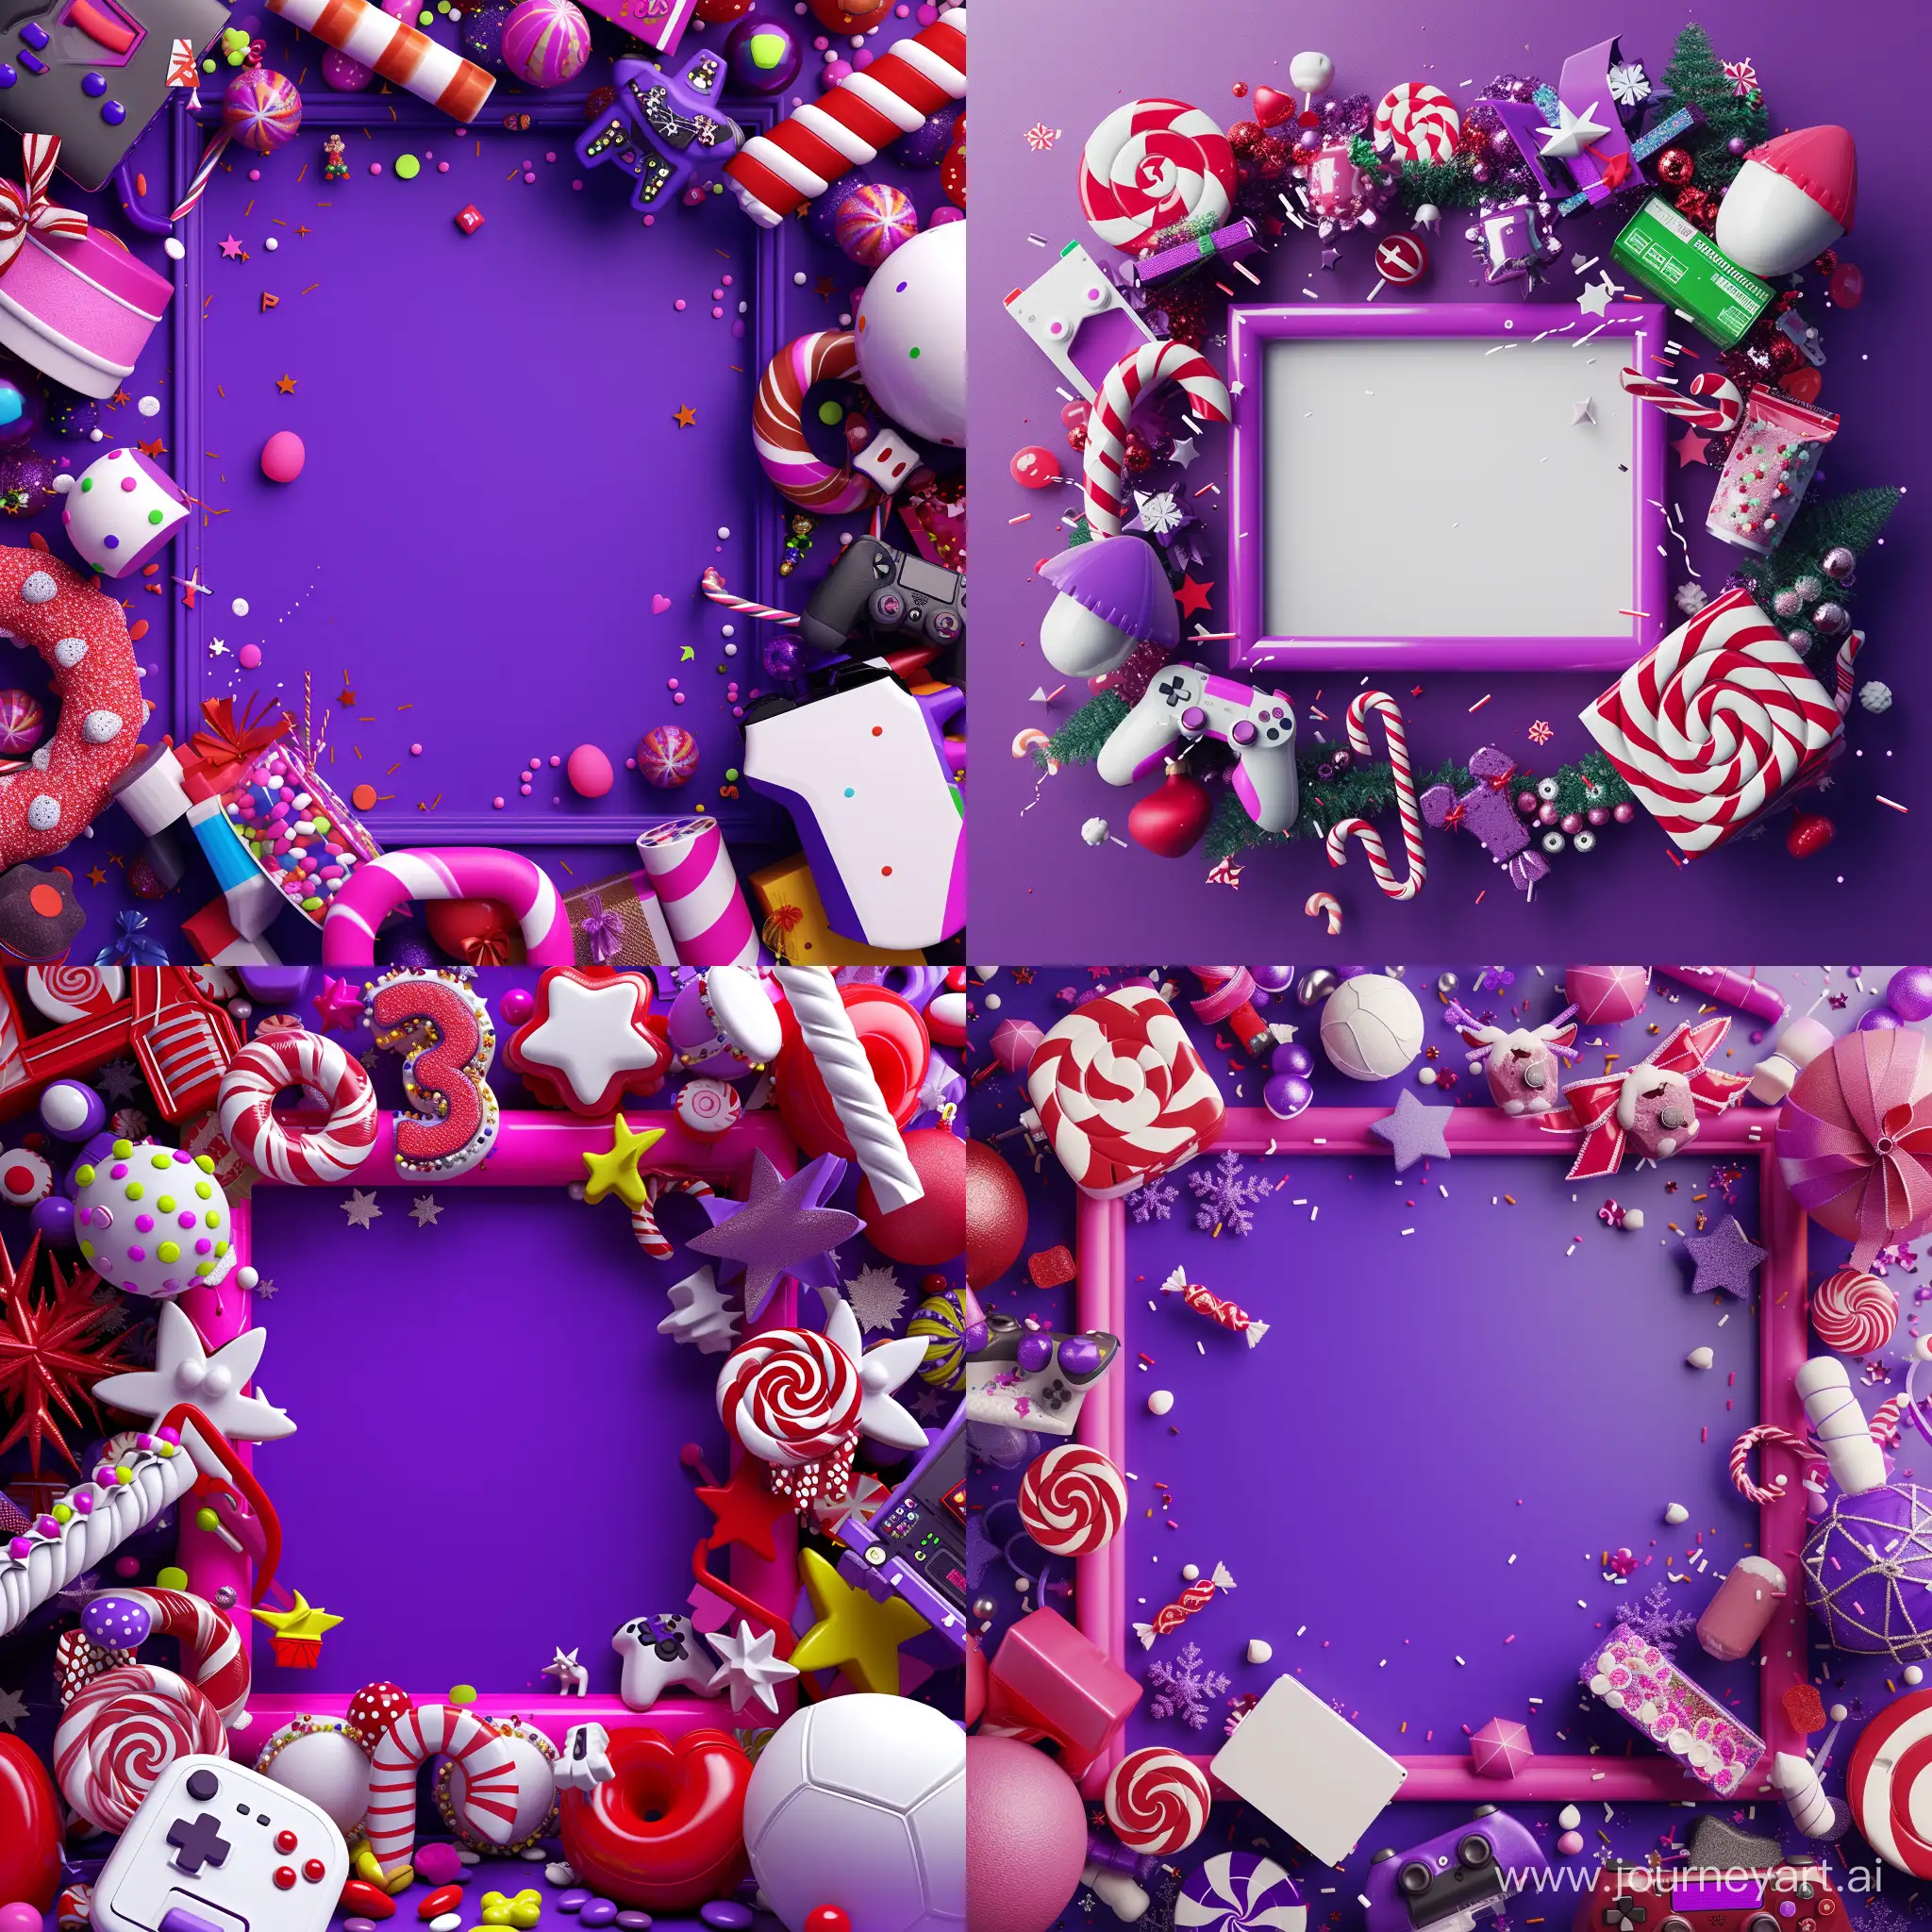 Create a vibrant and explosive 3D framed image for a video game store, focusing on a lively and festive theme. The design should feature fewer but larger elements such as oversized candies, gaming items, and festive decorations, arranged in a way that they appear to be bursting out from the edges towards the center. The central space should remain largely empty for text. Use bright and cheerful colors like vivid purple, magenta, neon pink, and white, ensuring the overall feel is energetic and far from subdued, perfectly fitting for a high-energy sales promotion.